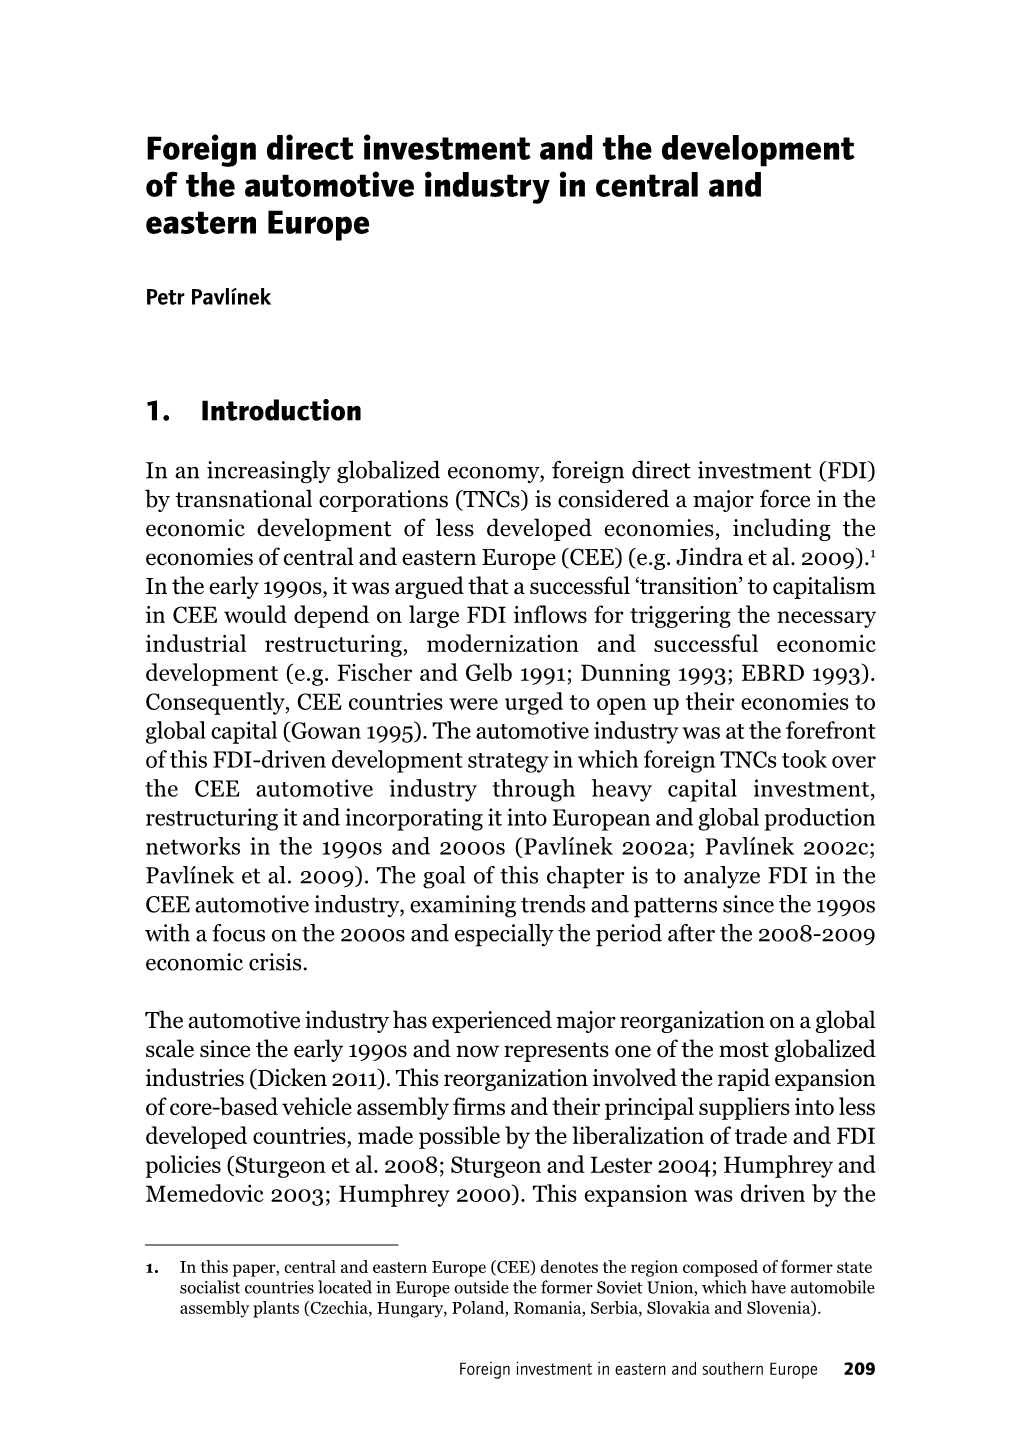 Foreign Direct Investment and the Development of the Automotive Industry in Central and Eastern Europe